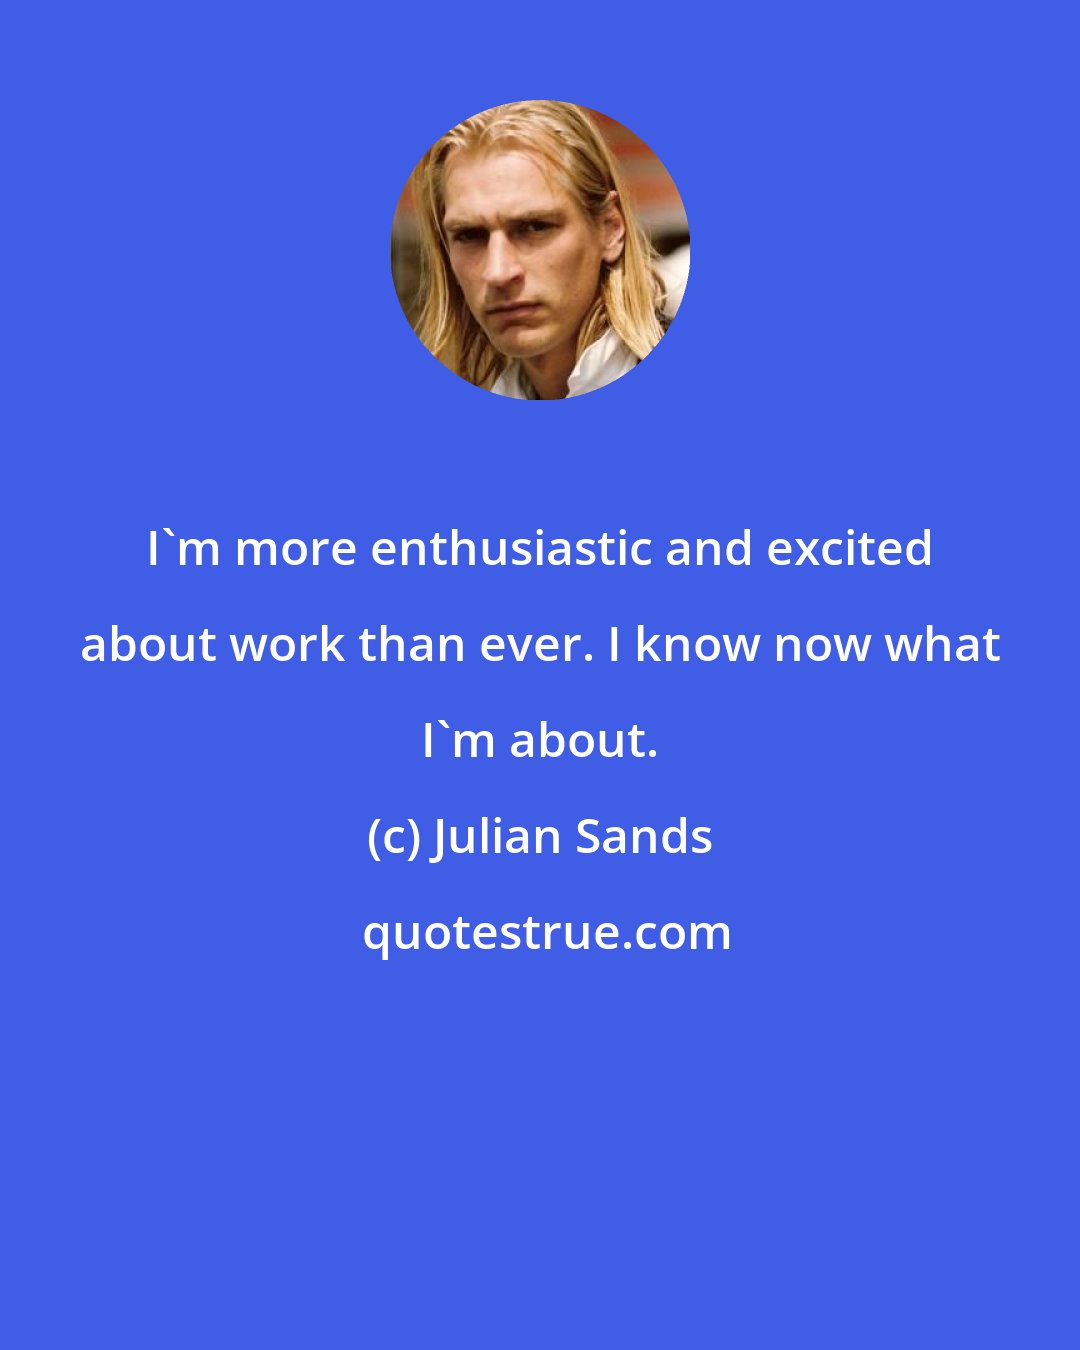 Julian Sands: I'm more enthusiastic and excited about work than ever. I know now what I'm about.